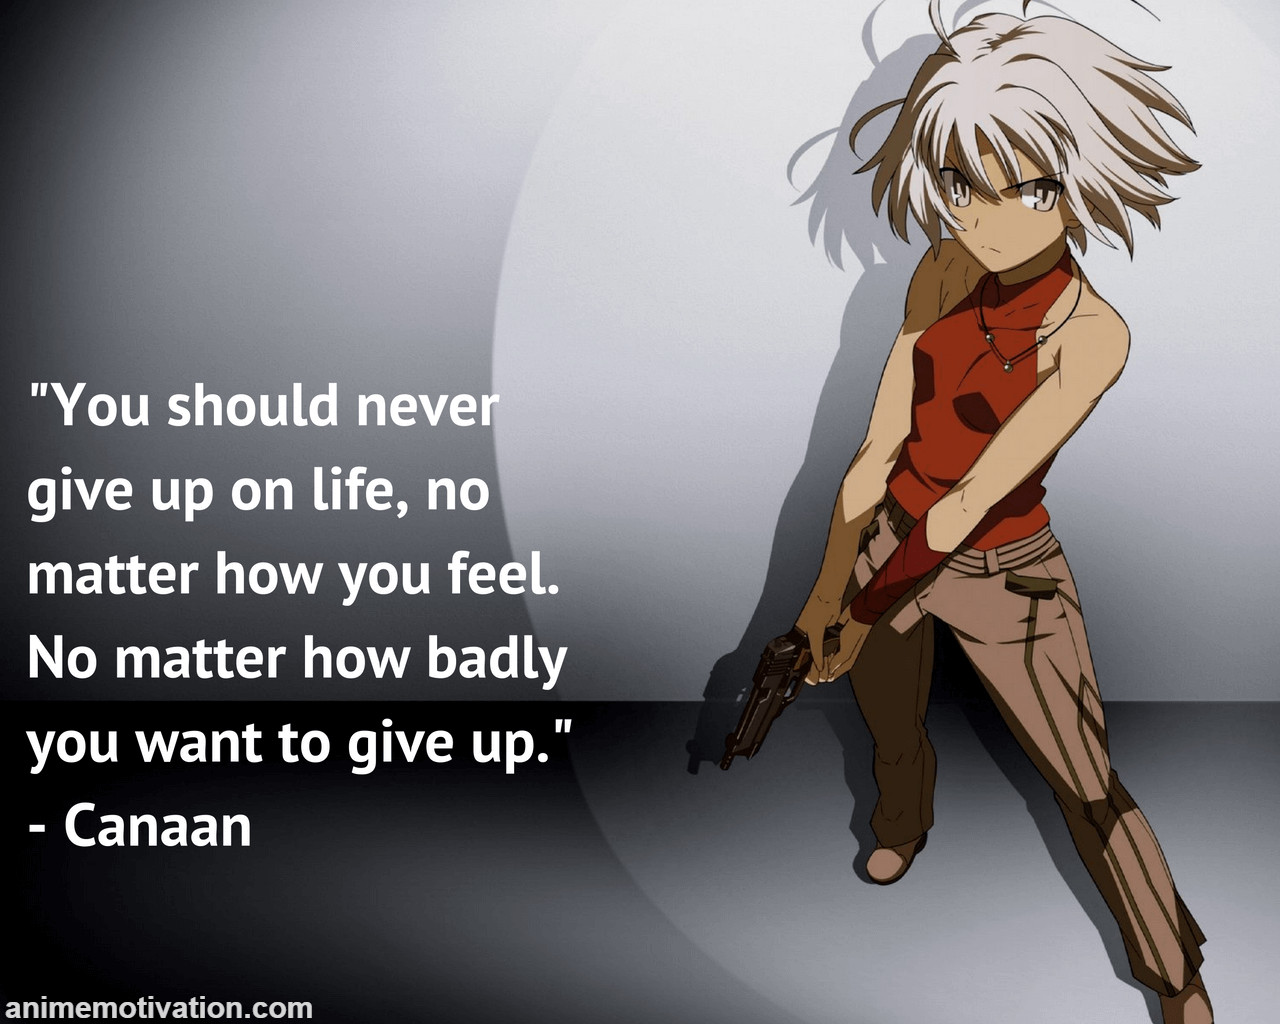 Motivational Anime Quotes
 30 Inspirational Anime Wallpapers You Need To Download